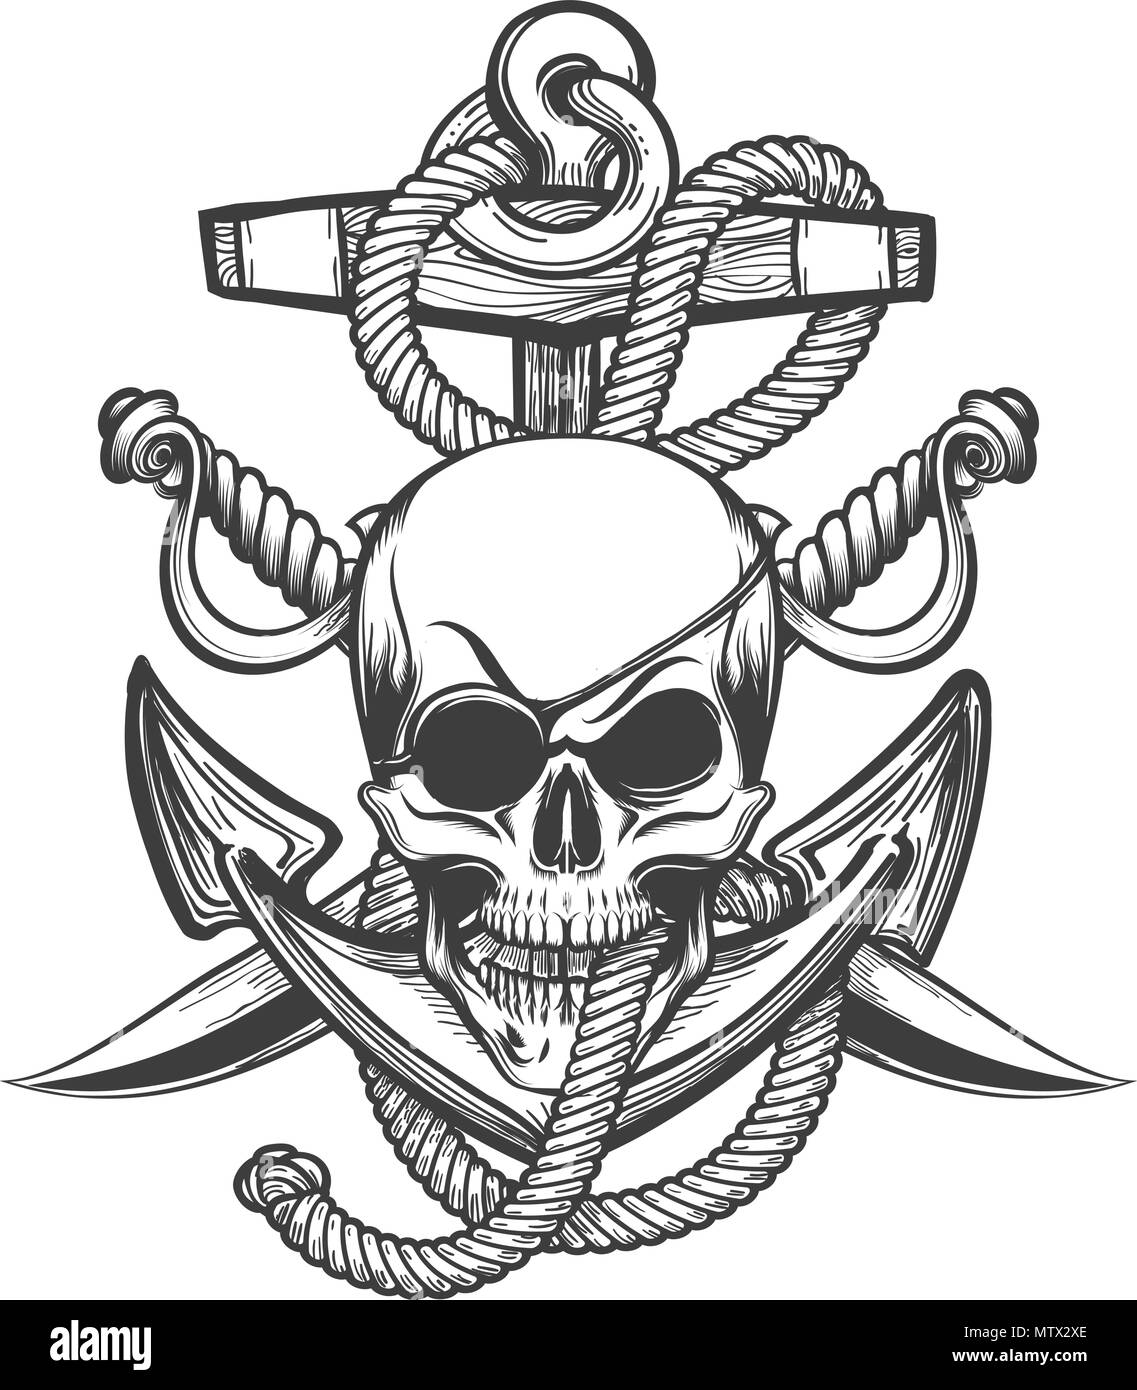 Human Skull with Eyepath and Two Sabres against Anchor in Ropes drawmn in tattoo style. Vector illustration. Stock Vector